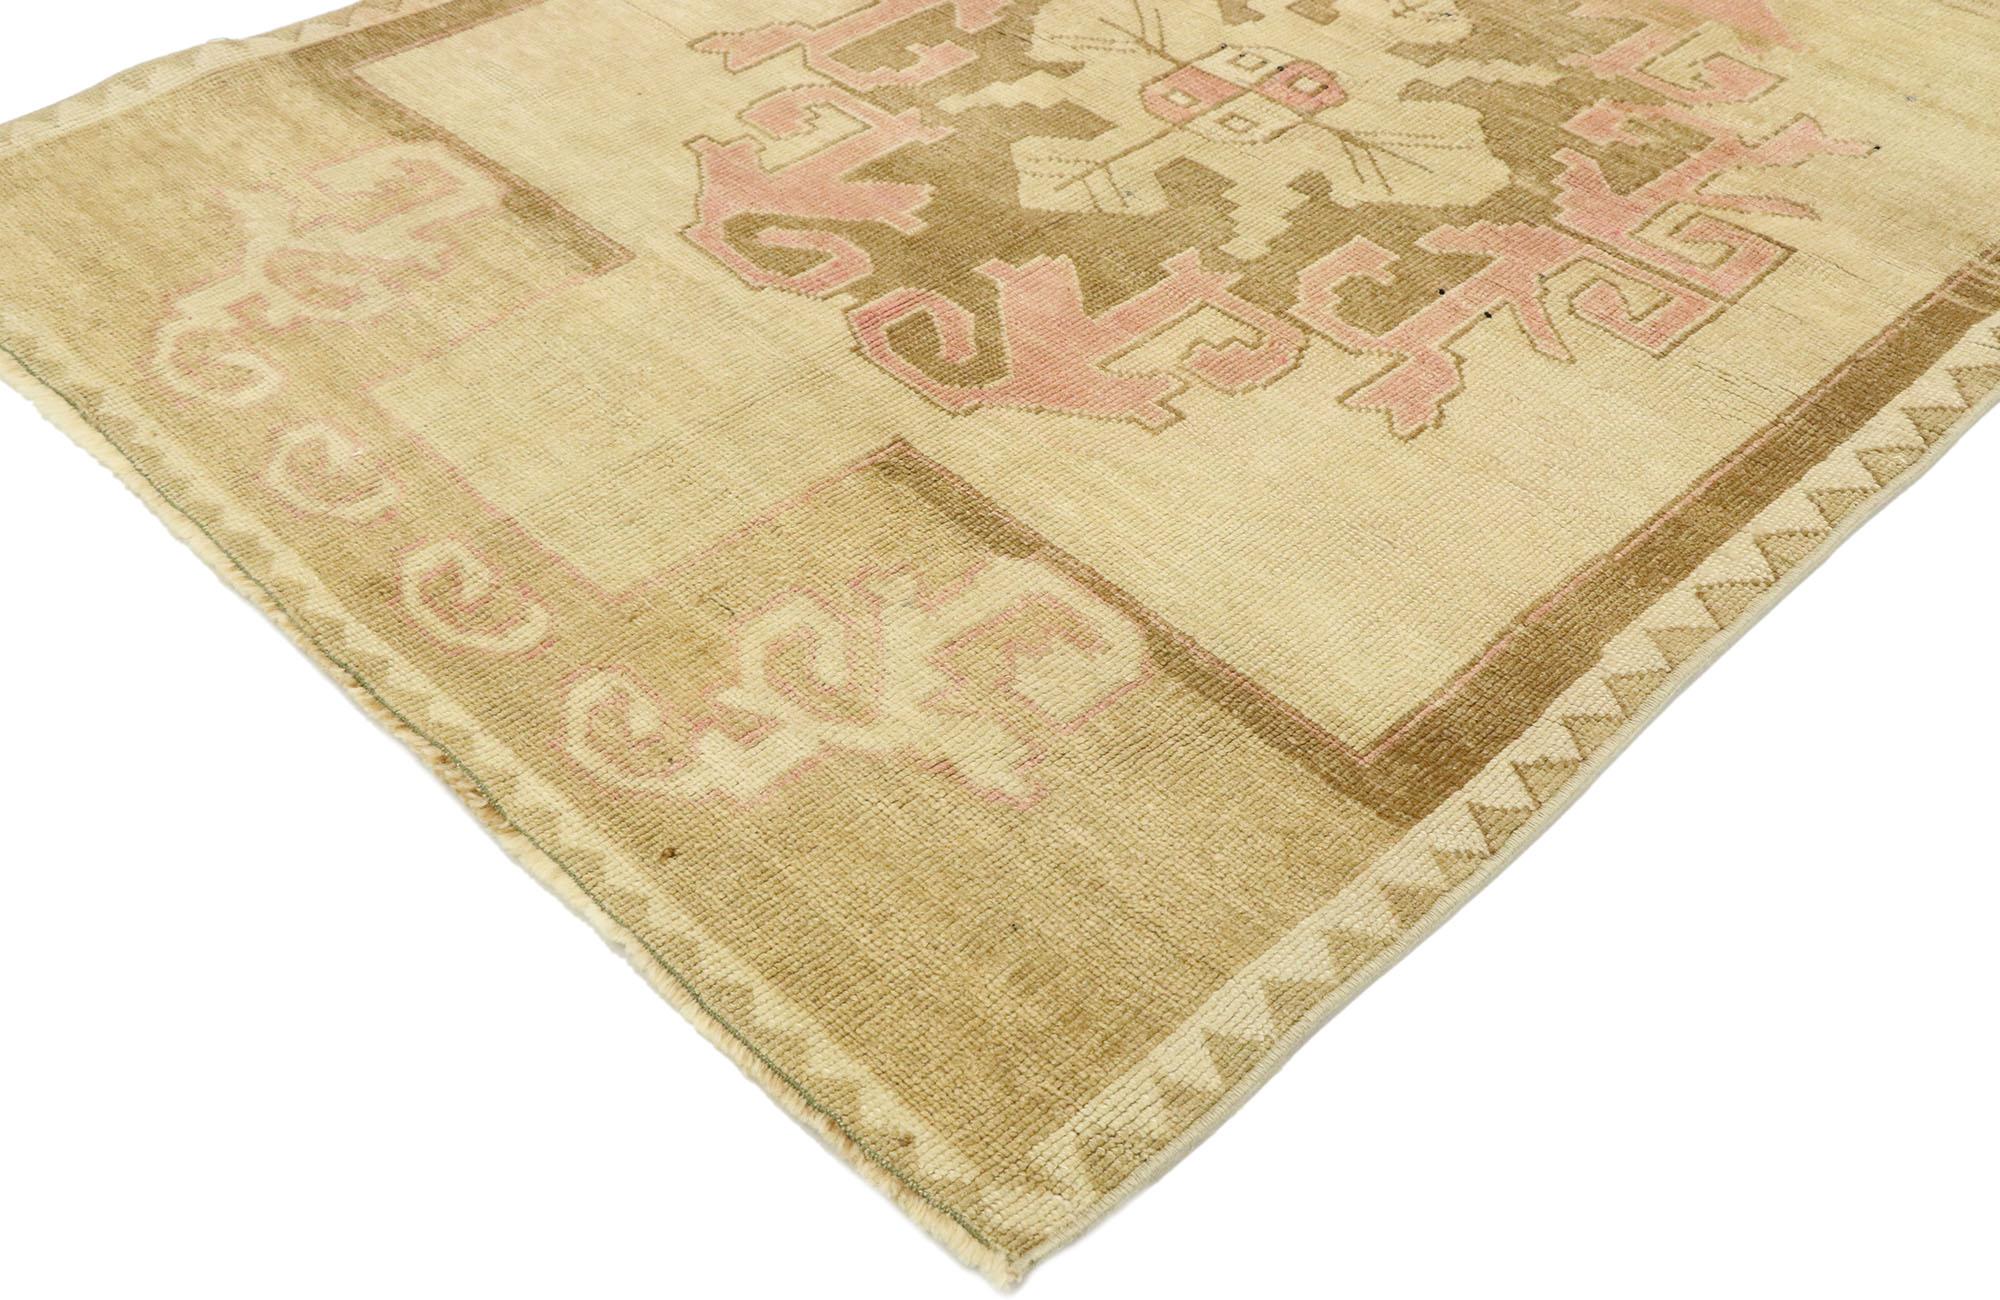 53064 vintage Turkish Kars rug with Romantic Mid-Century Modern style. Effortless beauty and romantic connotations meet soft, bespoke vibes with a feminine Mid-Century Modern style in this hand knotted wool vintage Turkish Kars rug. The antique